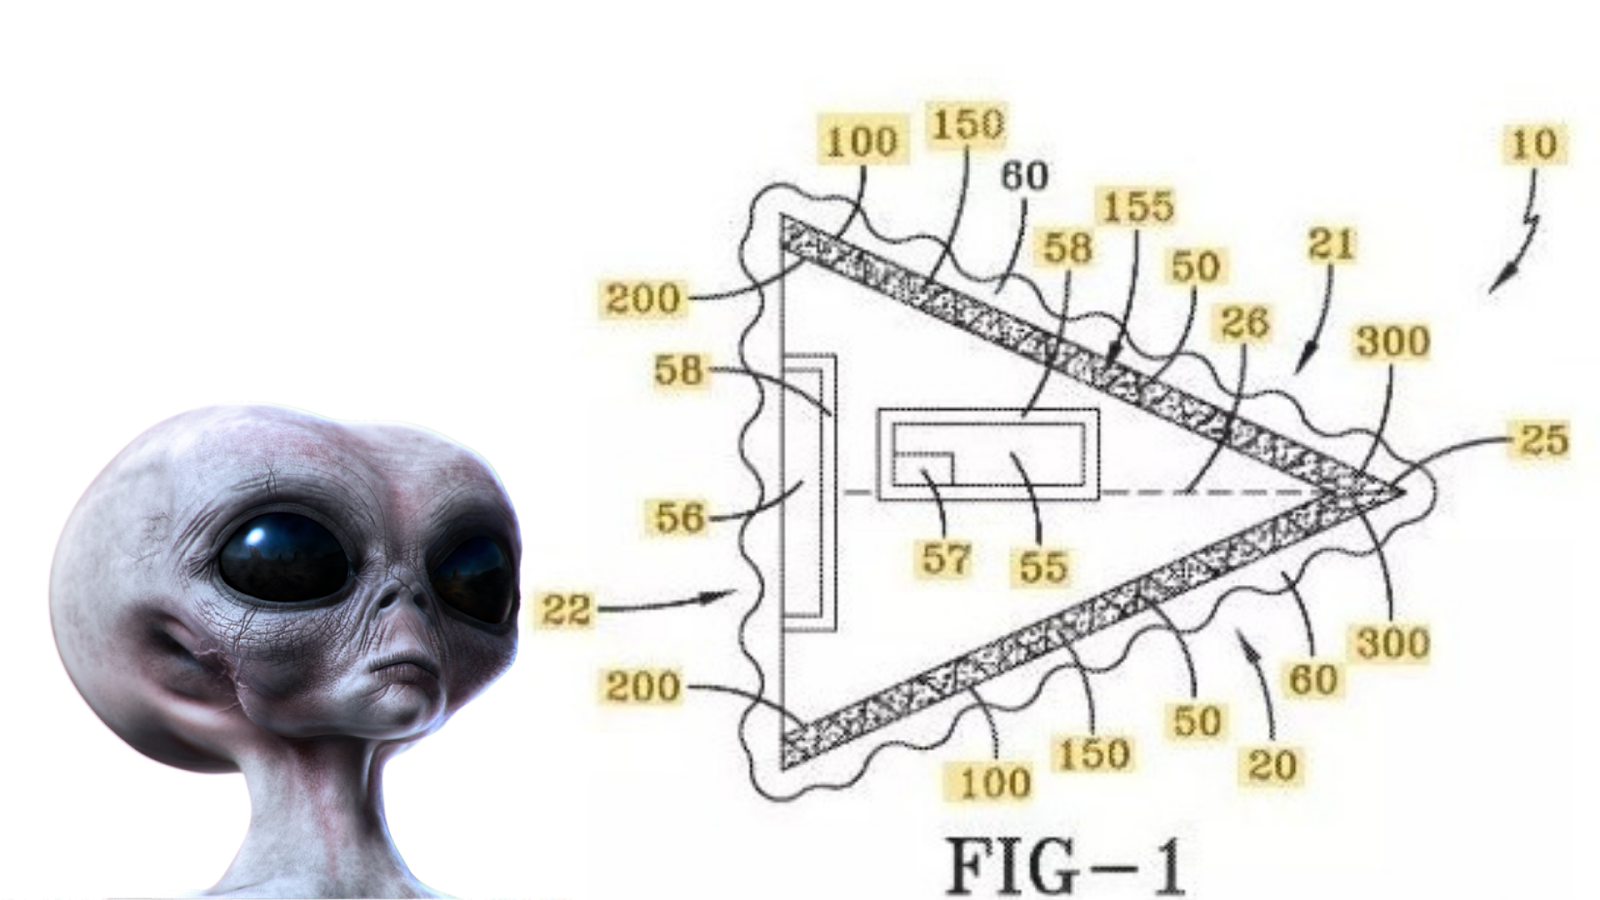 US Navy Secretly Created Triangle Aircraft Patent That Looks Like A UFO